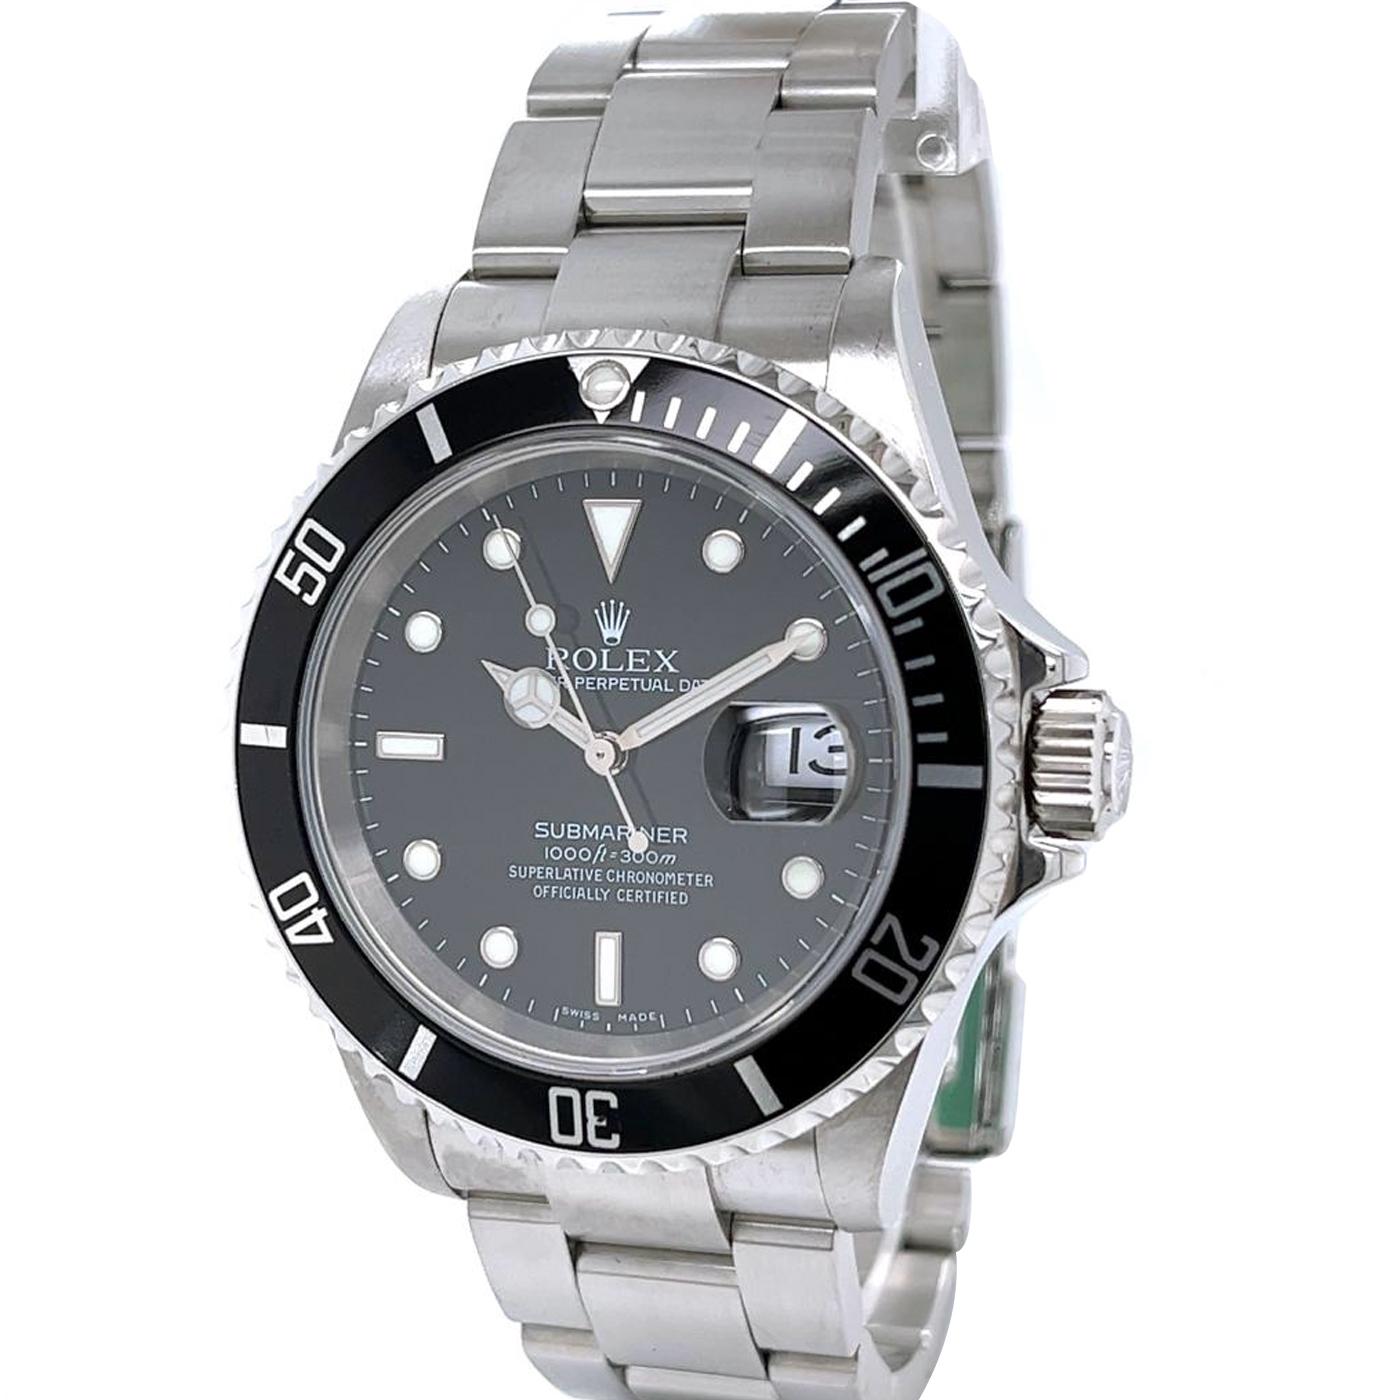 Modernist Rolex Submariner Black Dial Stainless Steel Oyster Mens Watch 16610 For Sale